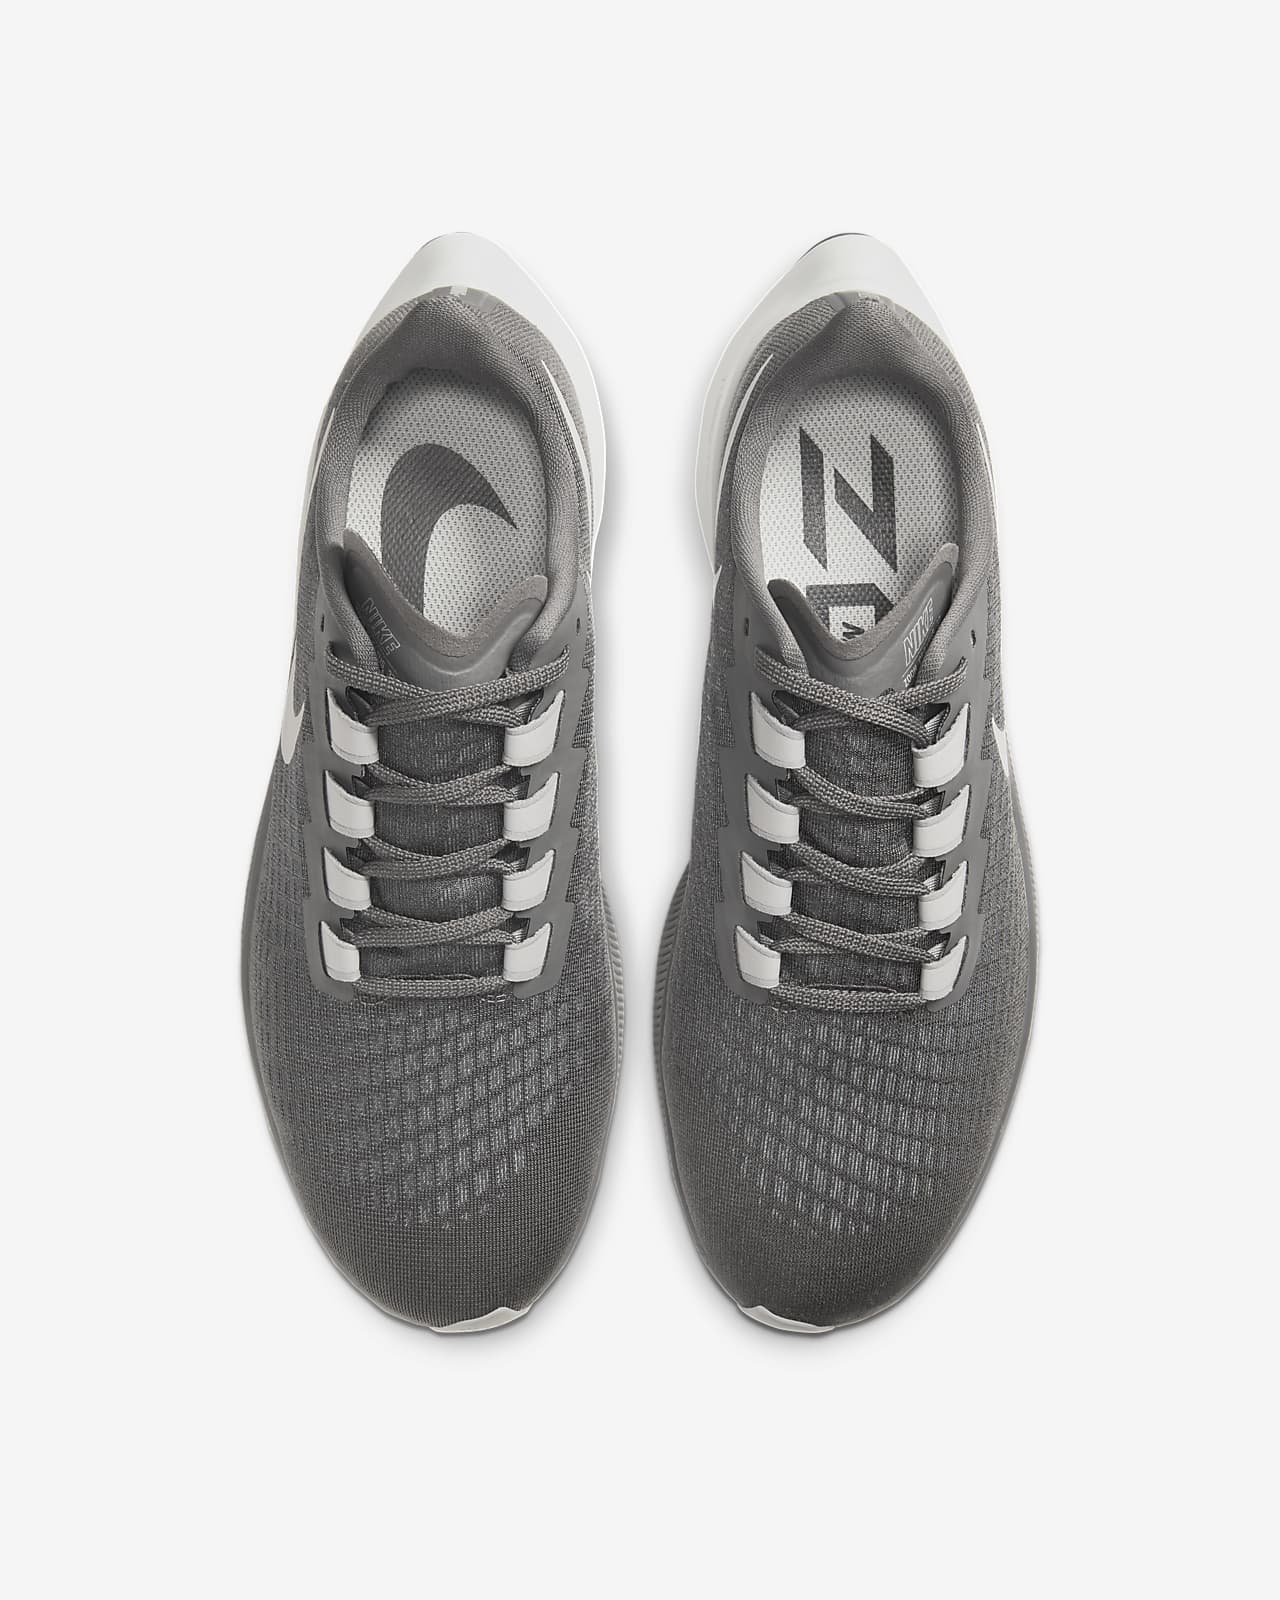 all grey nike shoes